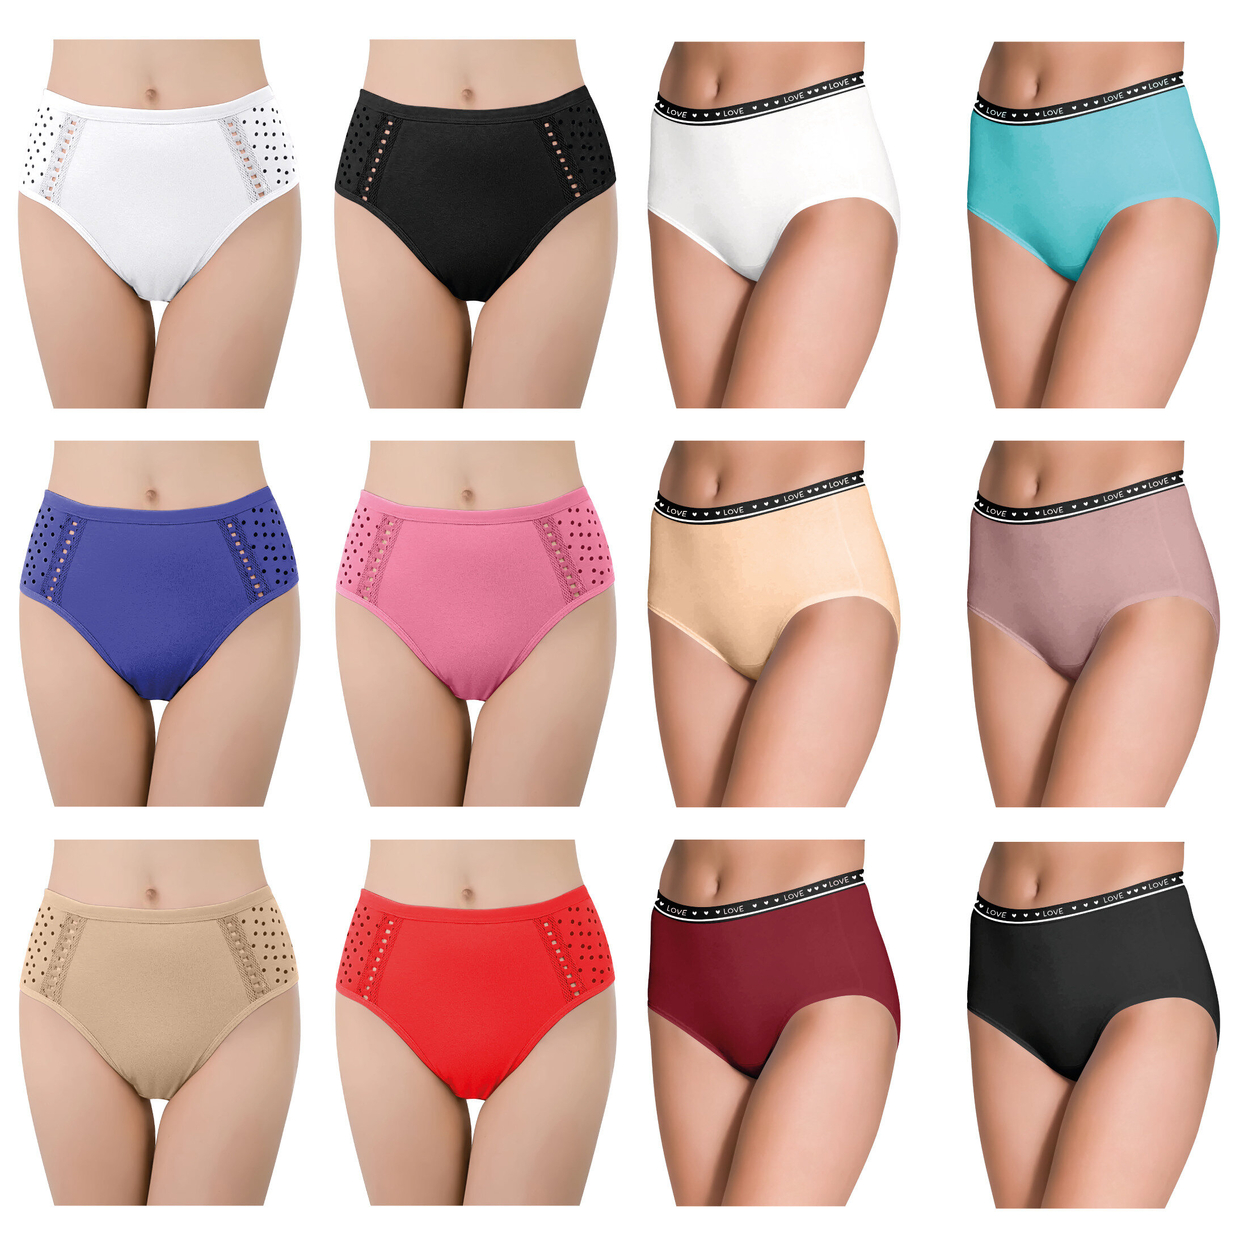 Multi-Pack: Women's Ultra Soft Moisture Wicking Panties Cotton Perfect Fit Underwear (Plus Sizes Available) - 6-Pack, Medium